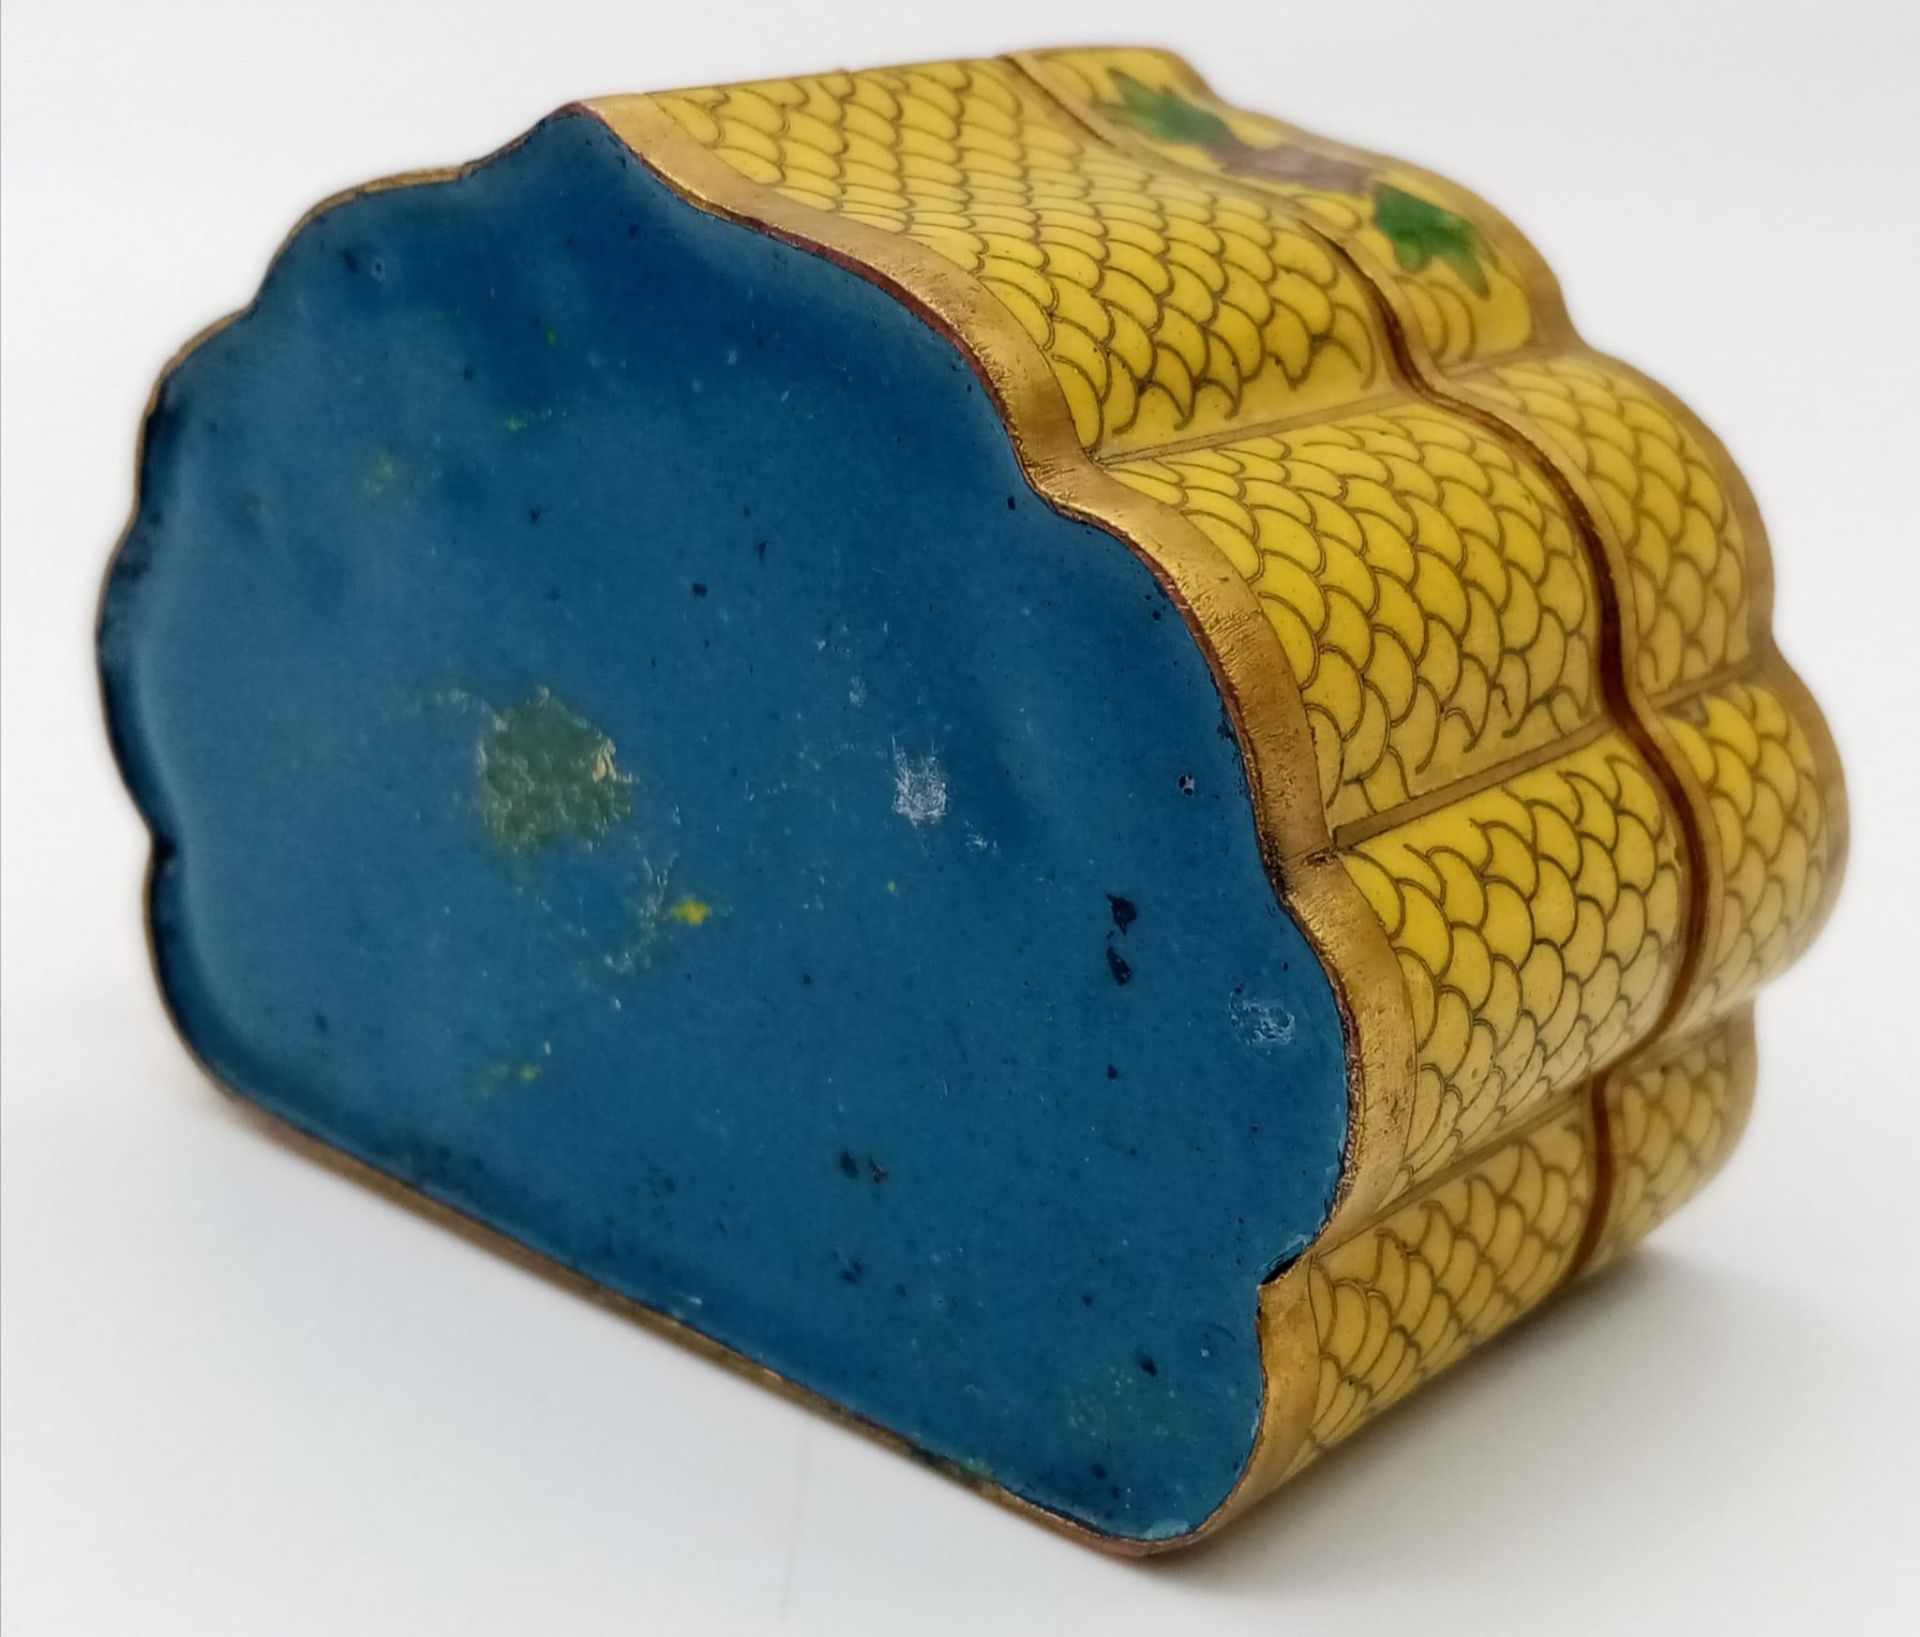 AN EXQUISITE EXAMPLE OF 19TH CENTURY CHINESE CLOISONNE WORK IN THE FORM OF A SMALL TRINKET BOX . - Image 5 of 6